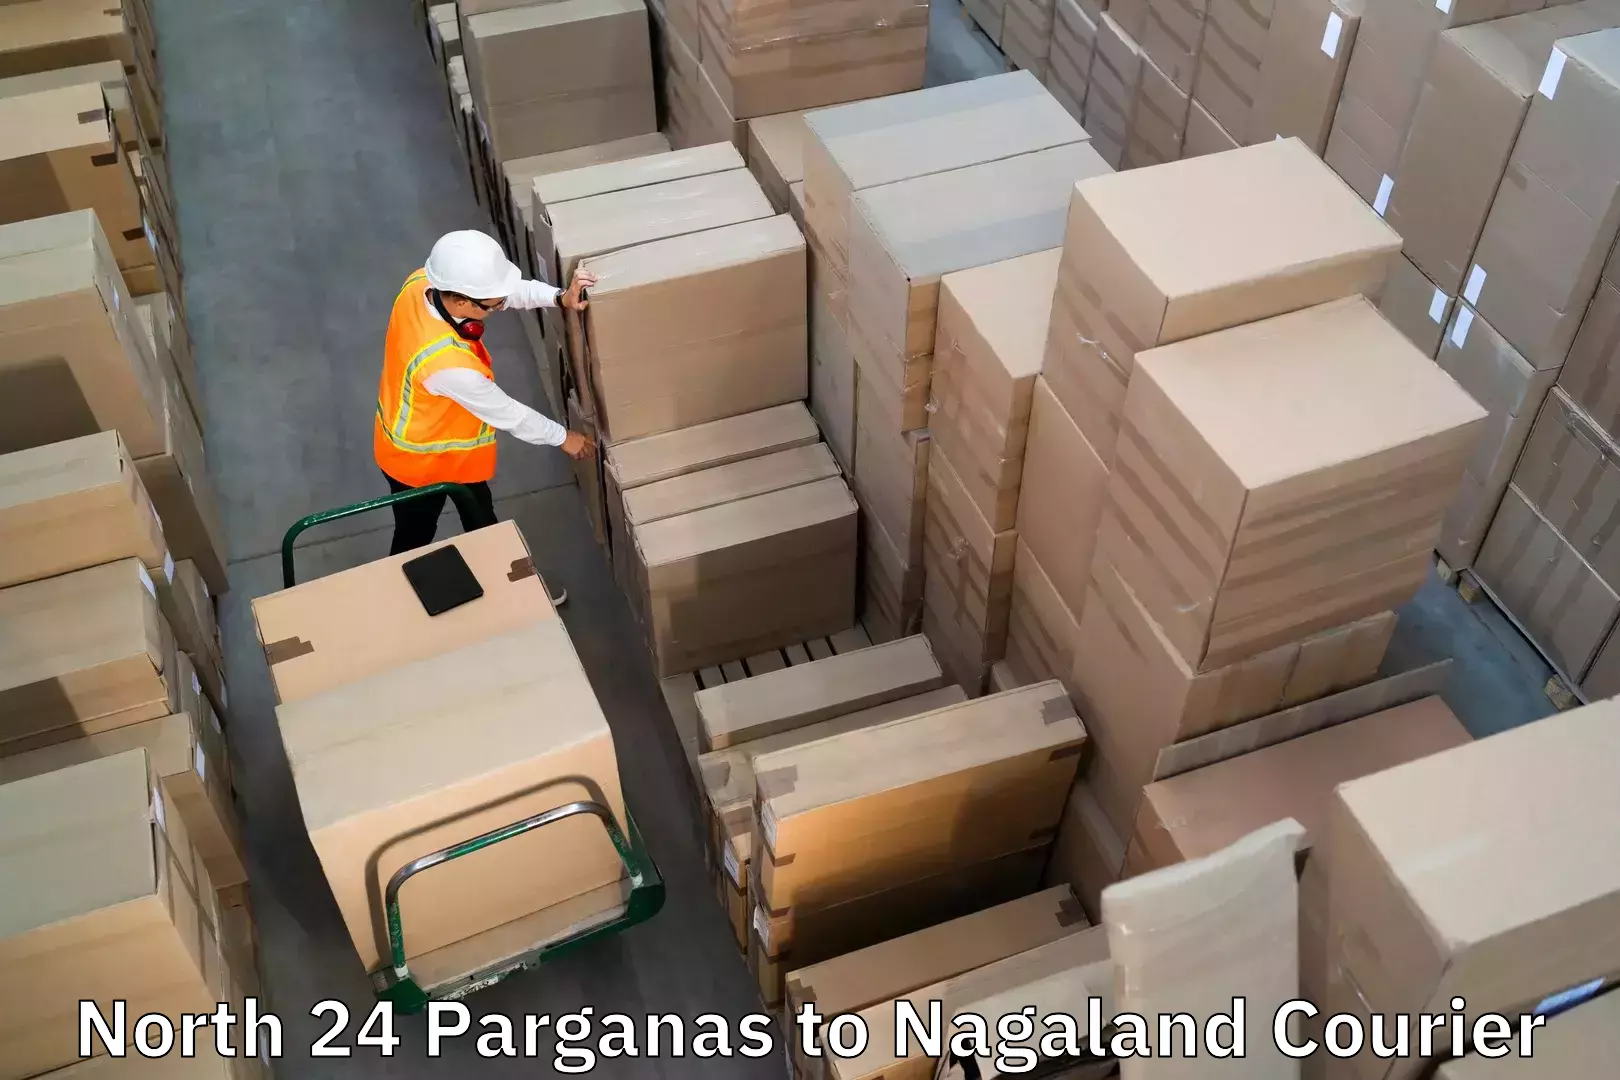 Luggage transport consulting North 24 Parganas to Nagaland